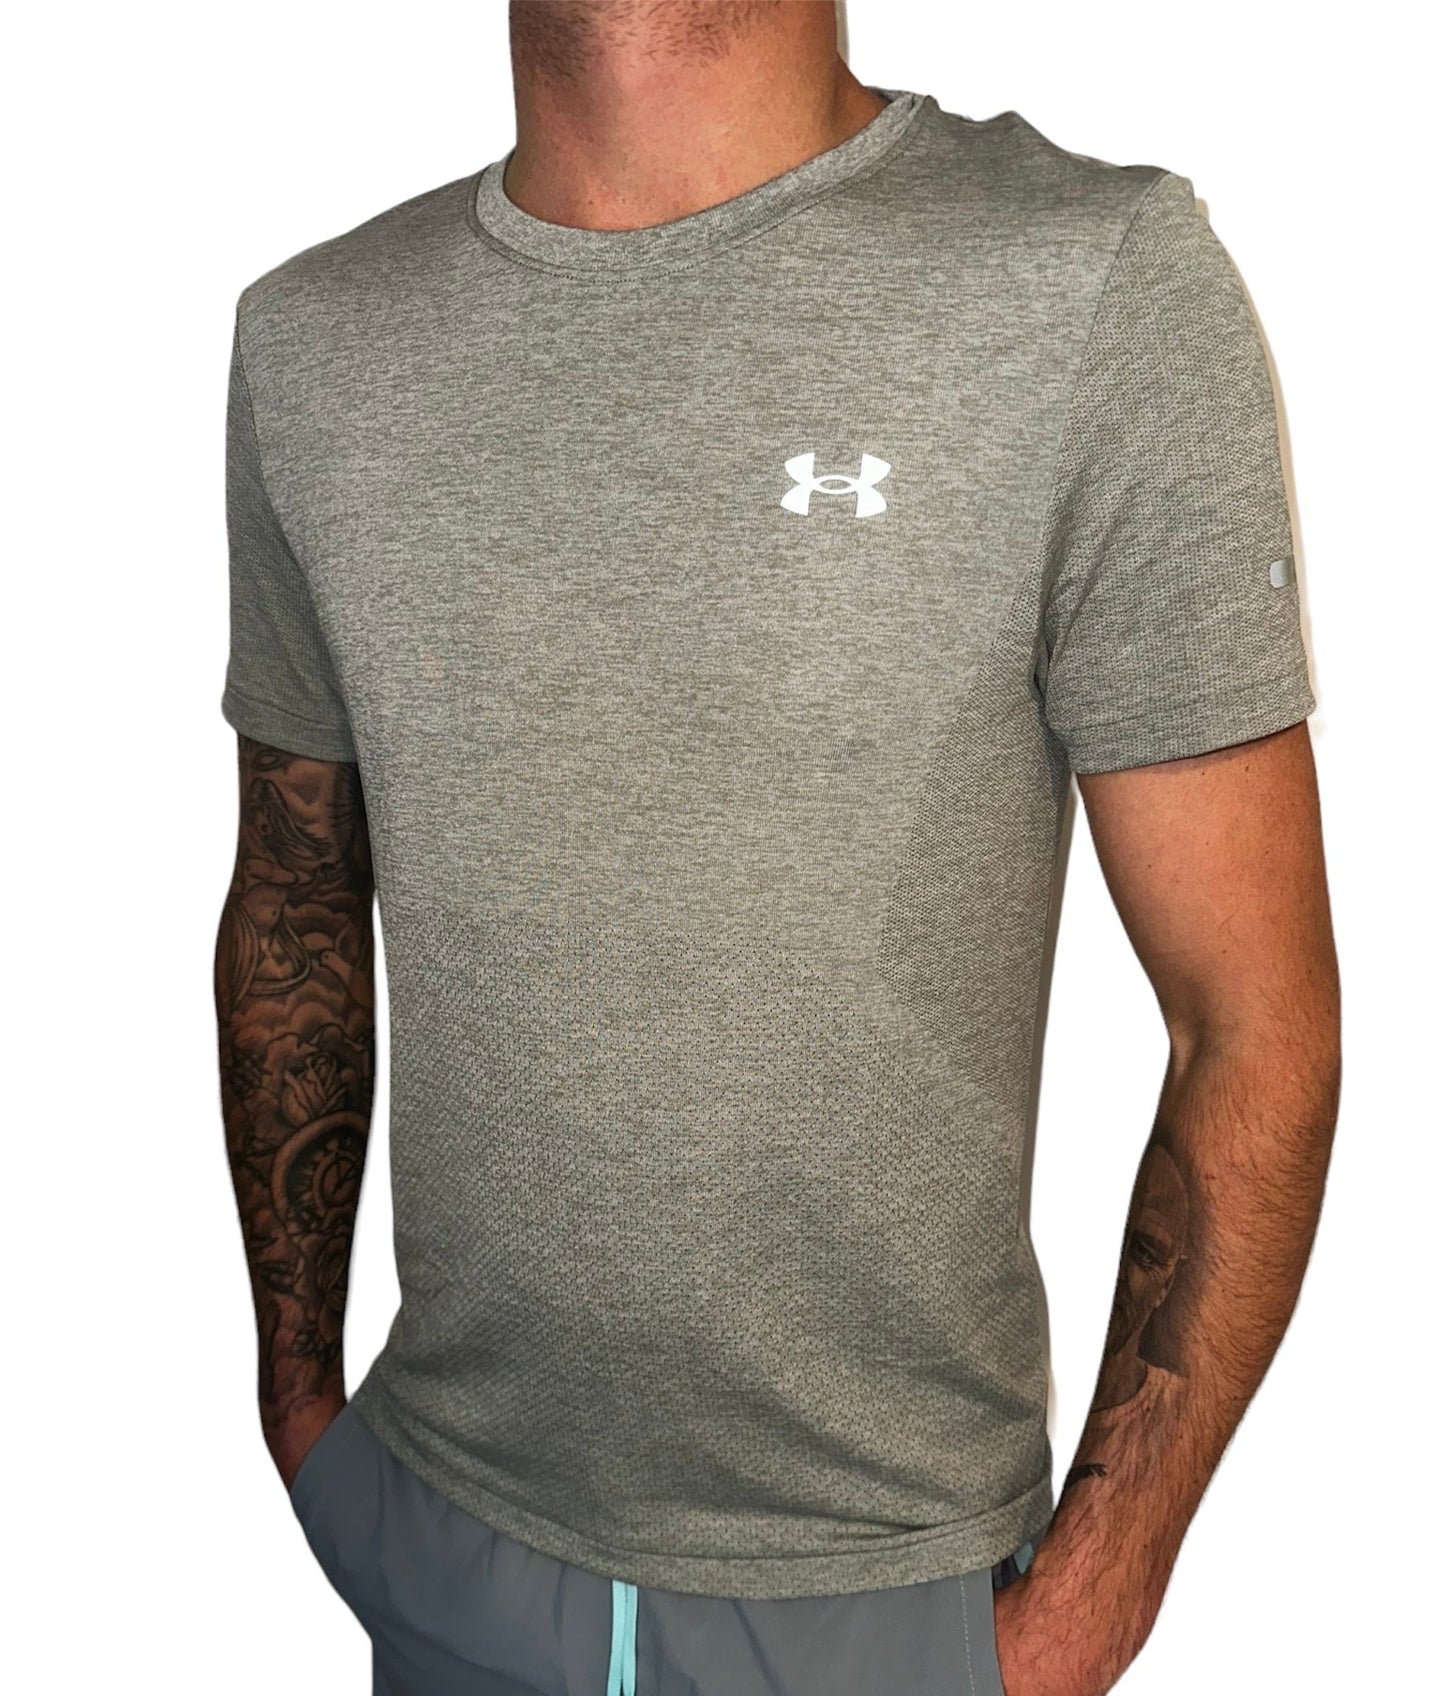 UNDER ARMOUR SEAMLESS STRIDE T-SHIRT & LAUNCH PRO SHORTS - GREY / BLACK